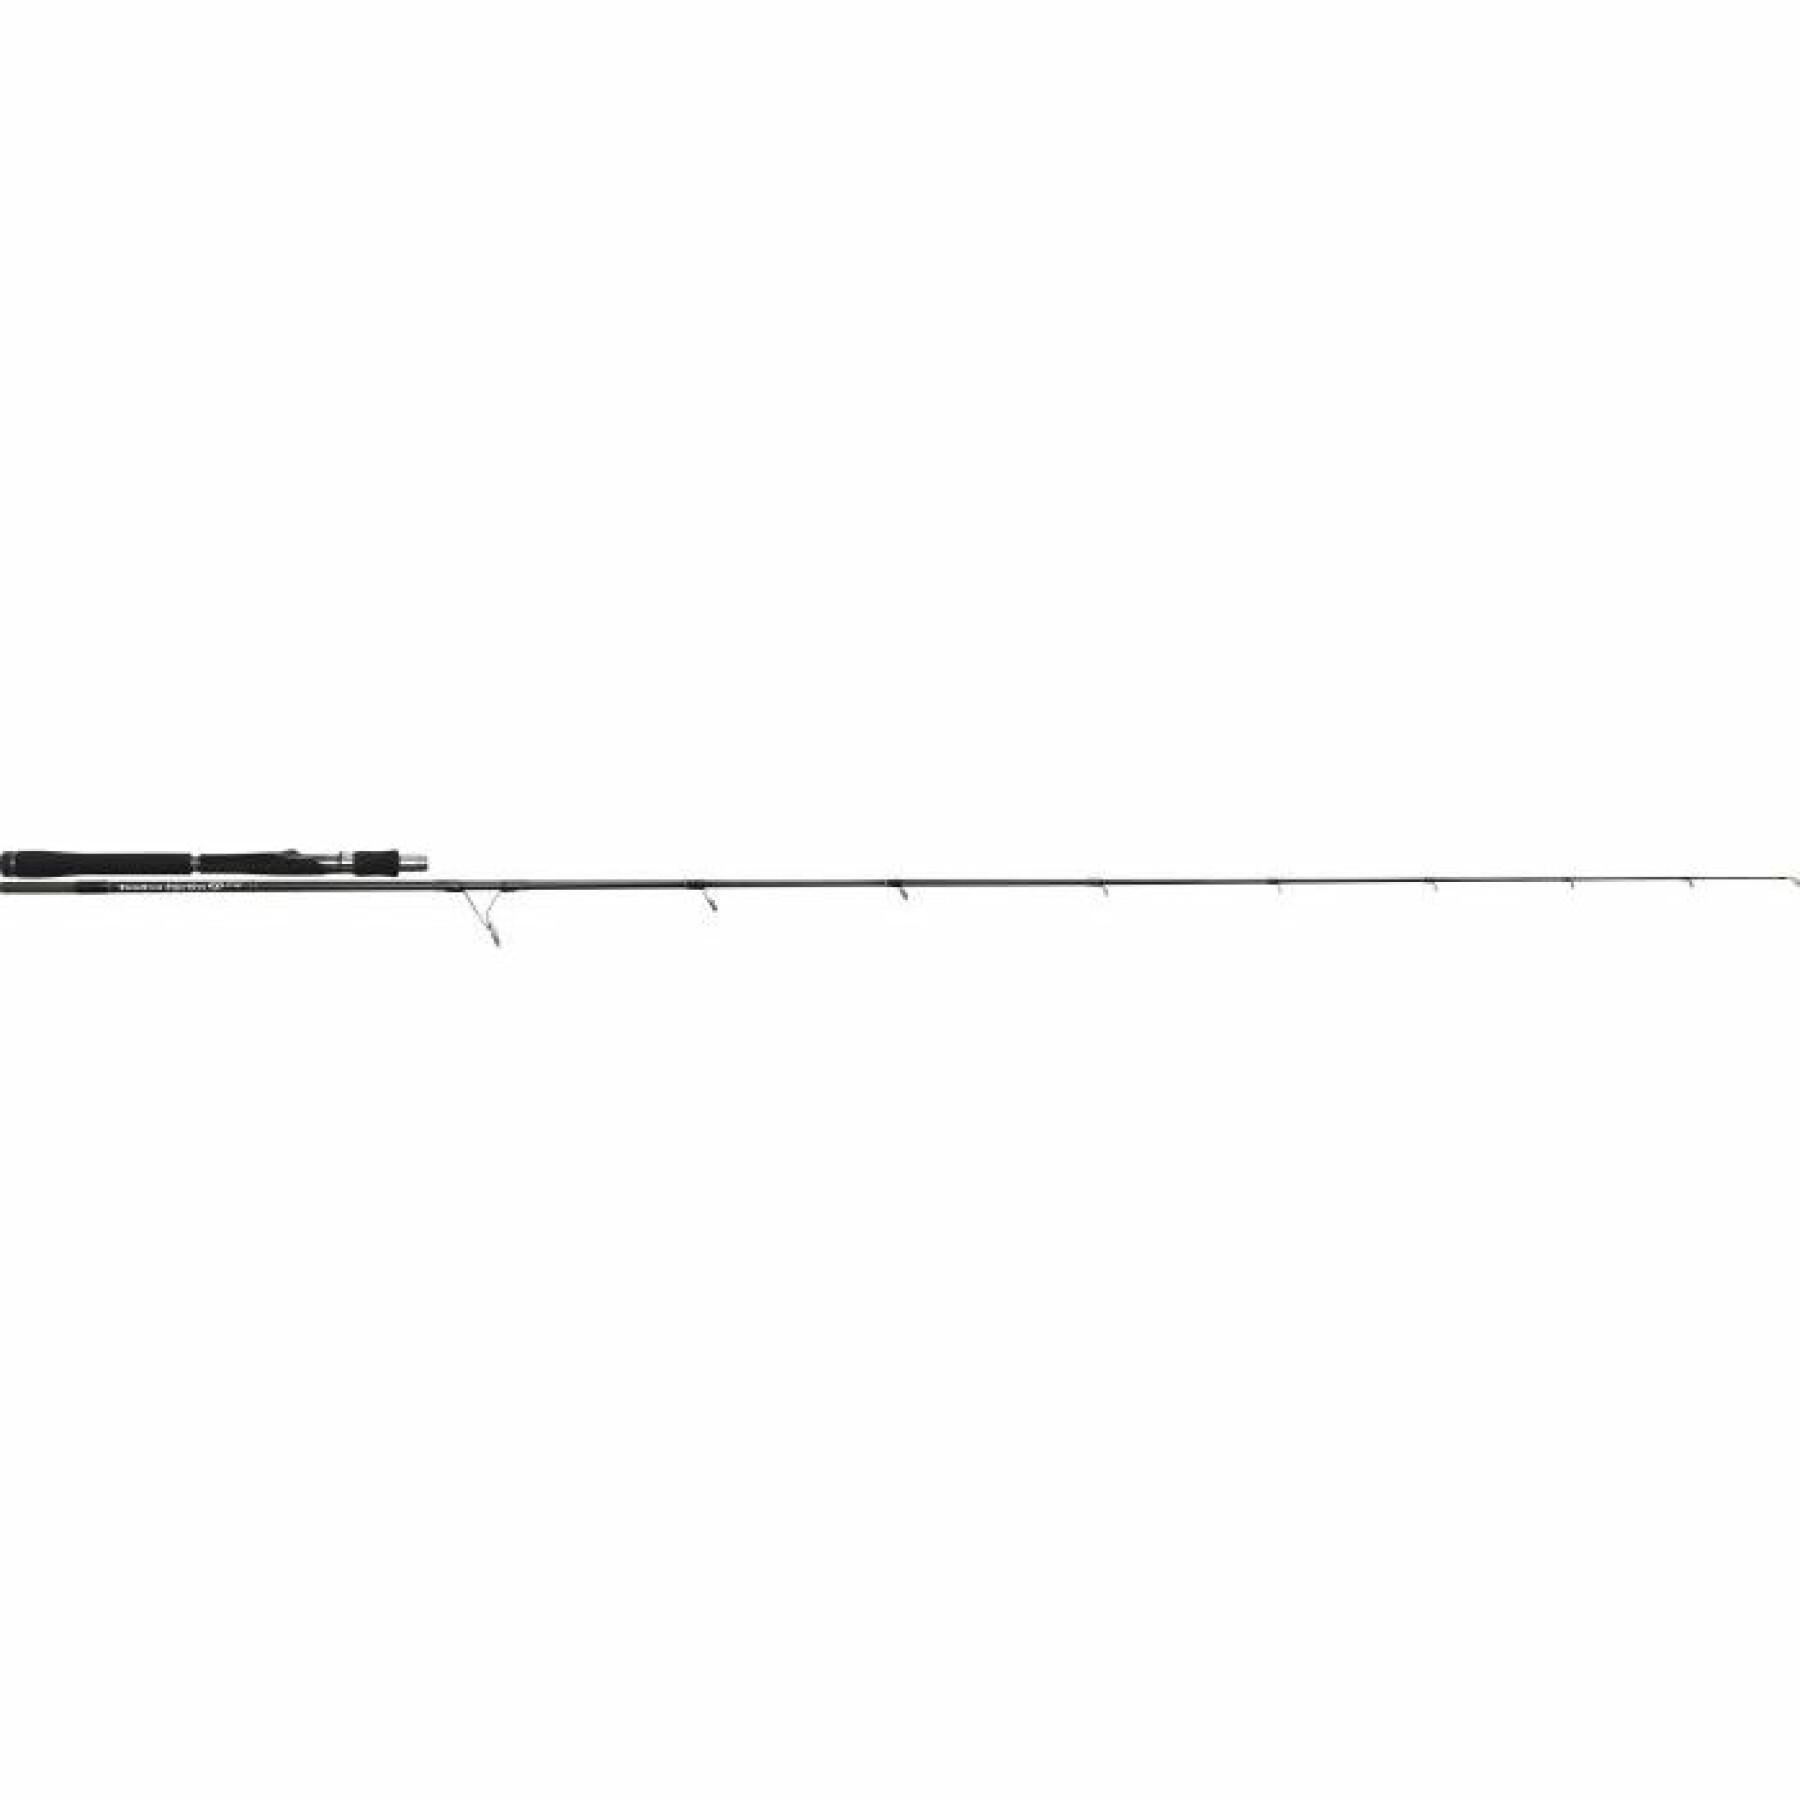 Spinning rod Tenryu Injection SP 71MH 7-28g